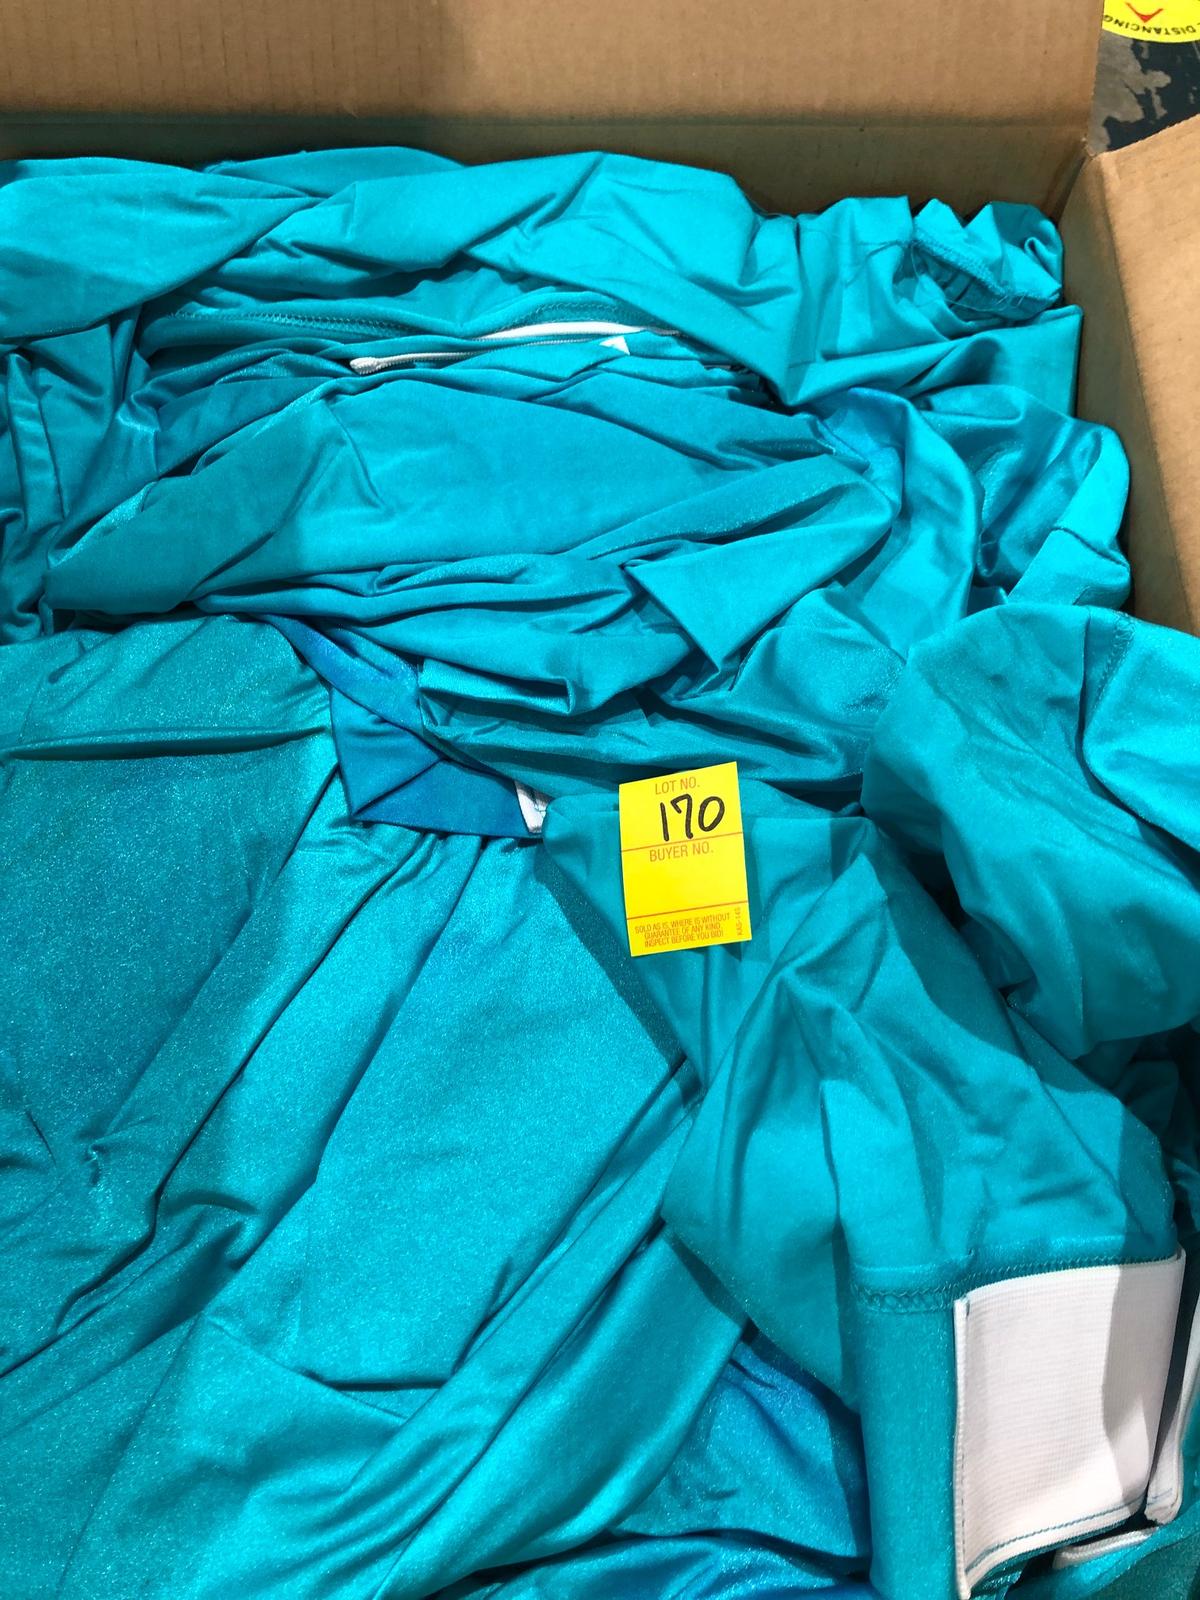 2 BOXES OF 60 TURQUOISE SPANDEX ROUND TABLE COVERS, X $